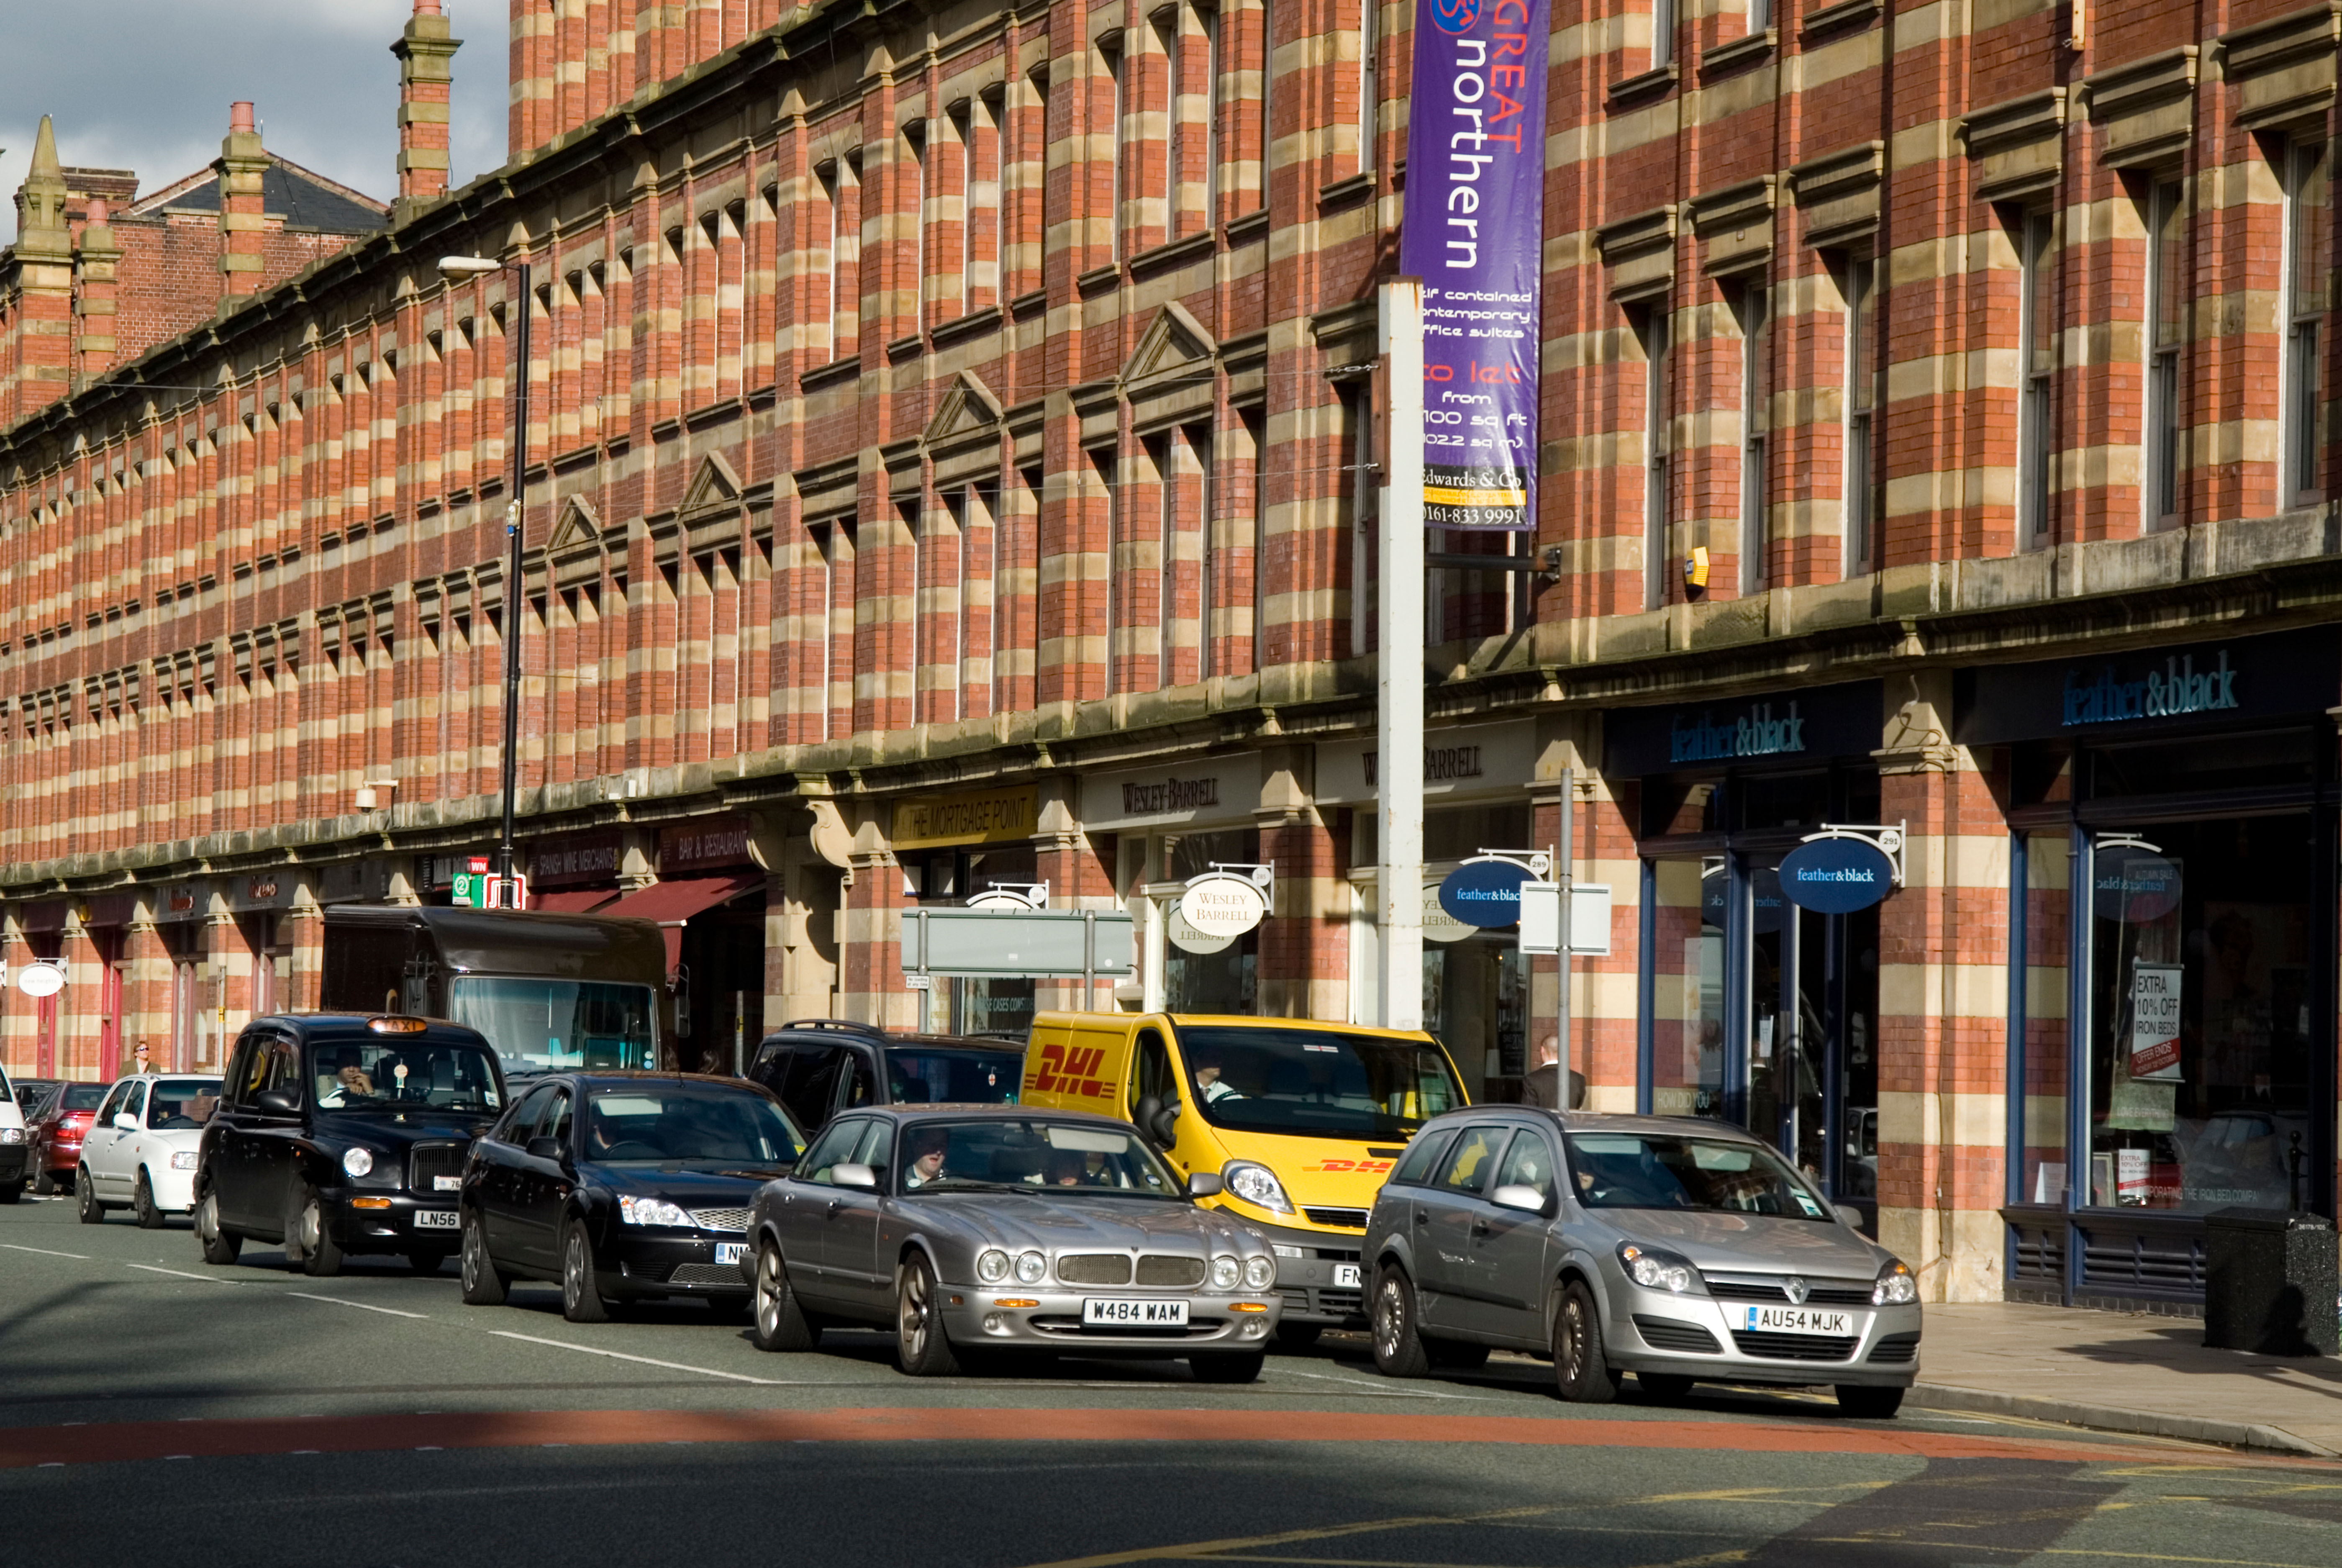 Traffic in Manchester's Deansgate